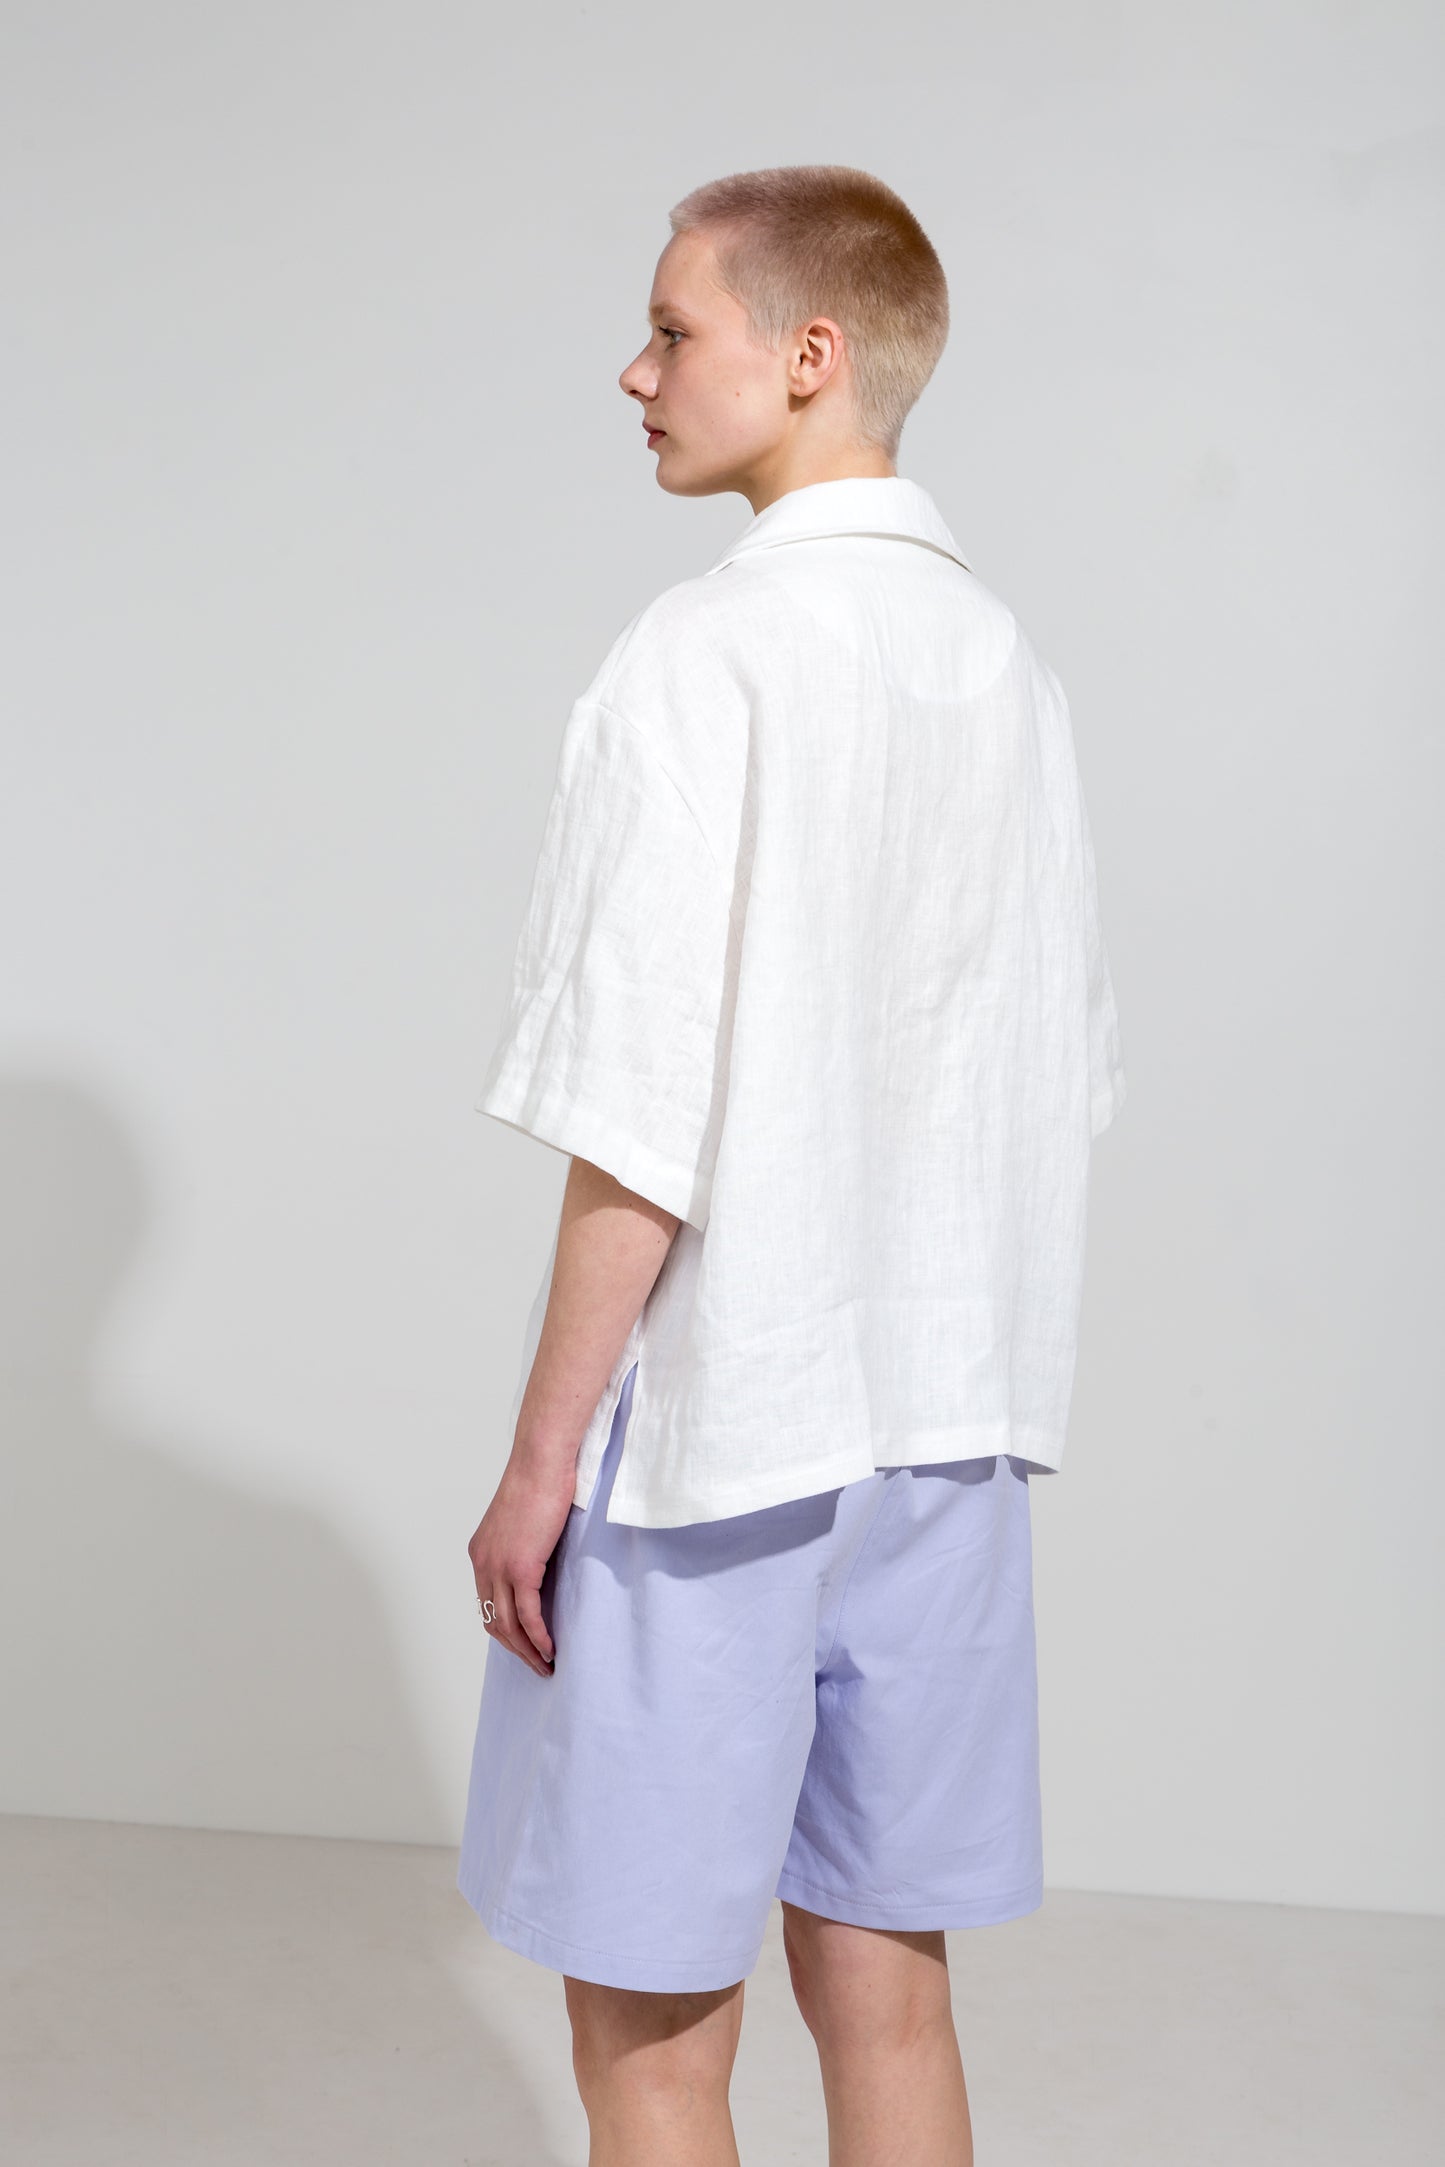 Open collar short sleeve shirt in white linen and lilac workwear shorts